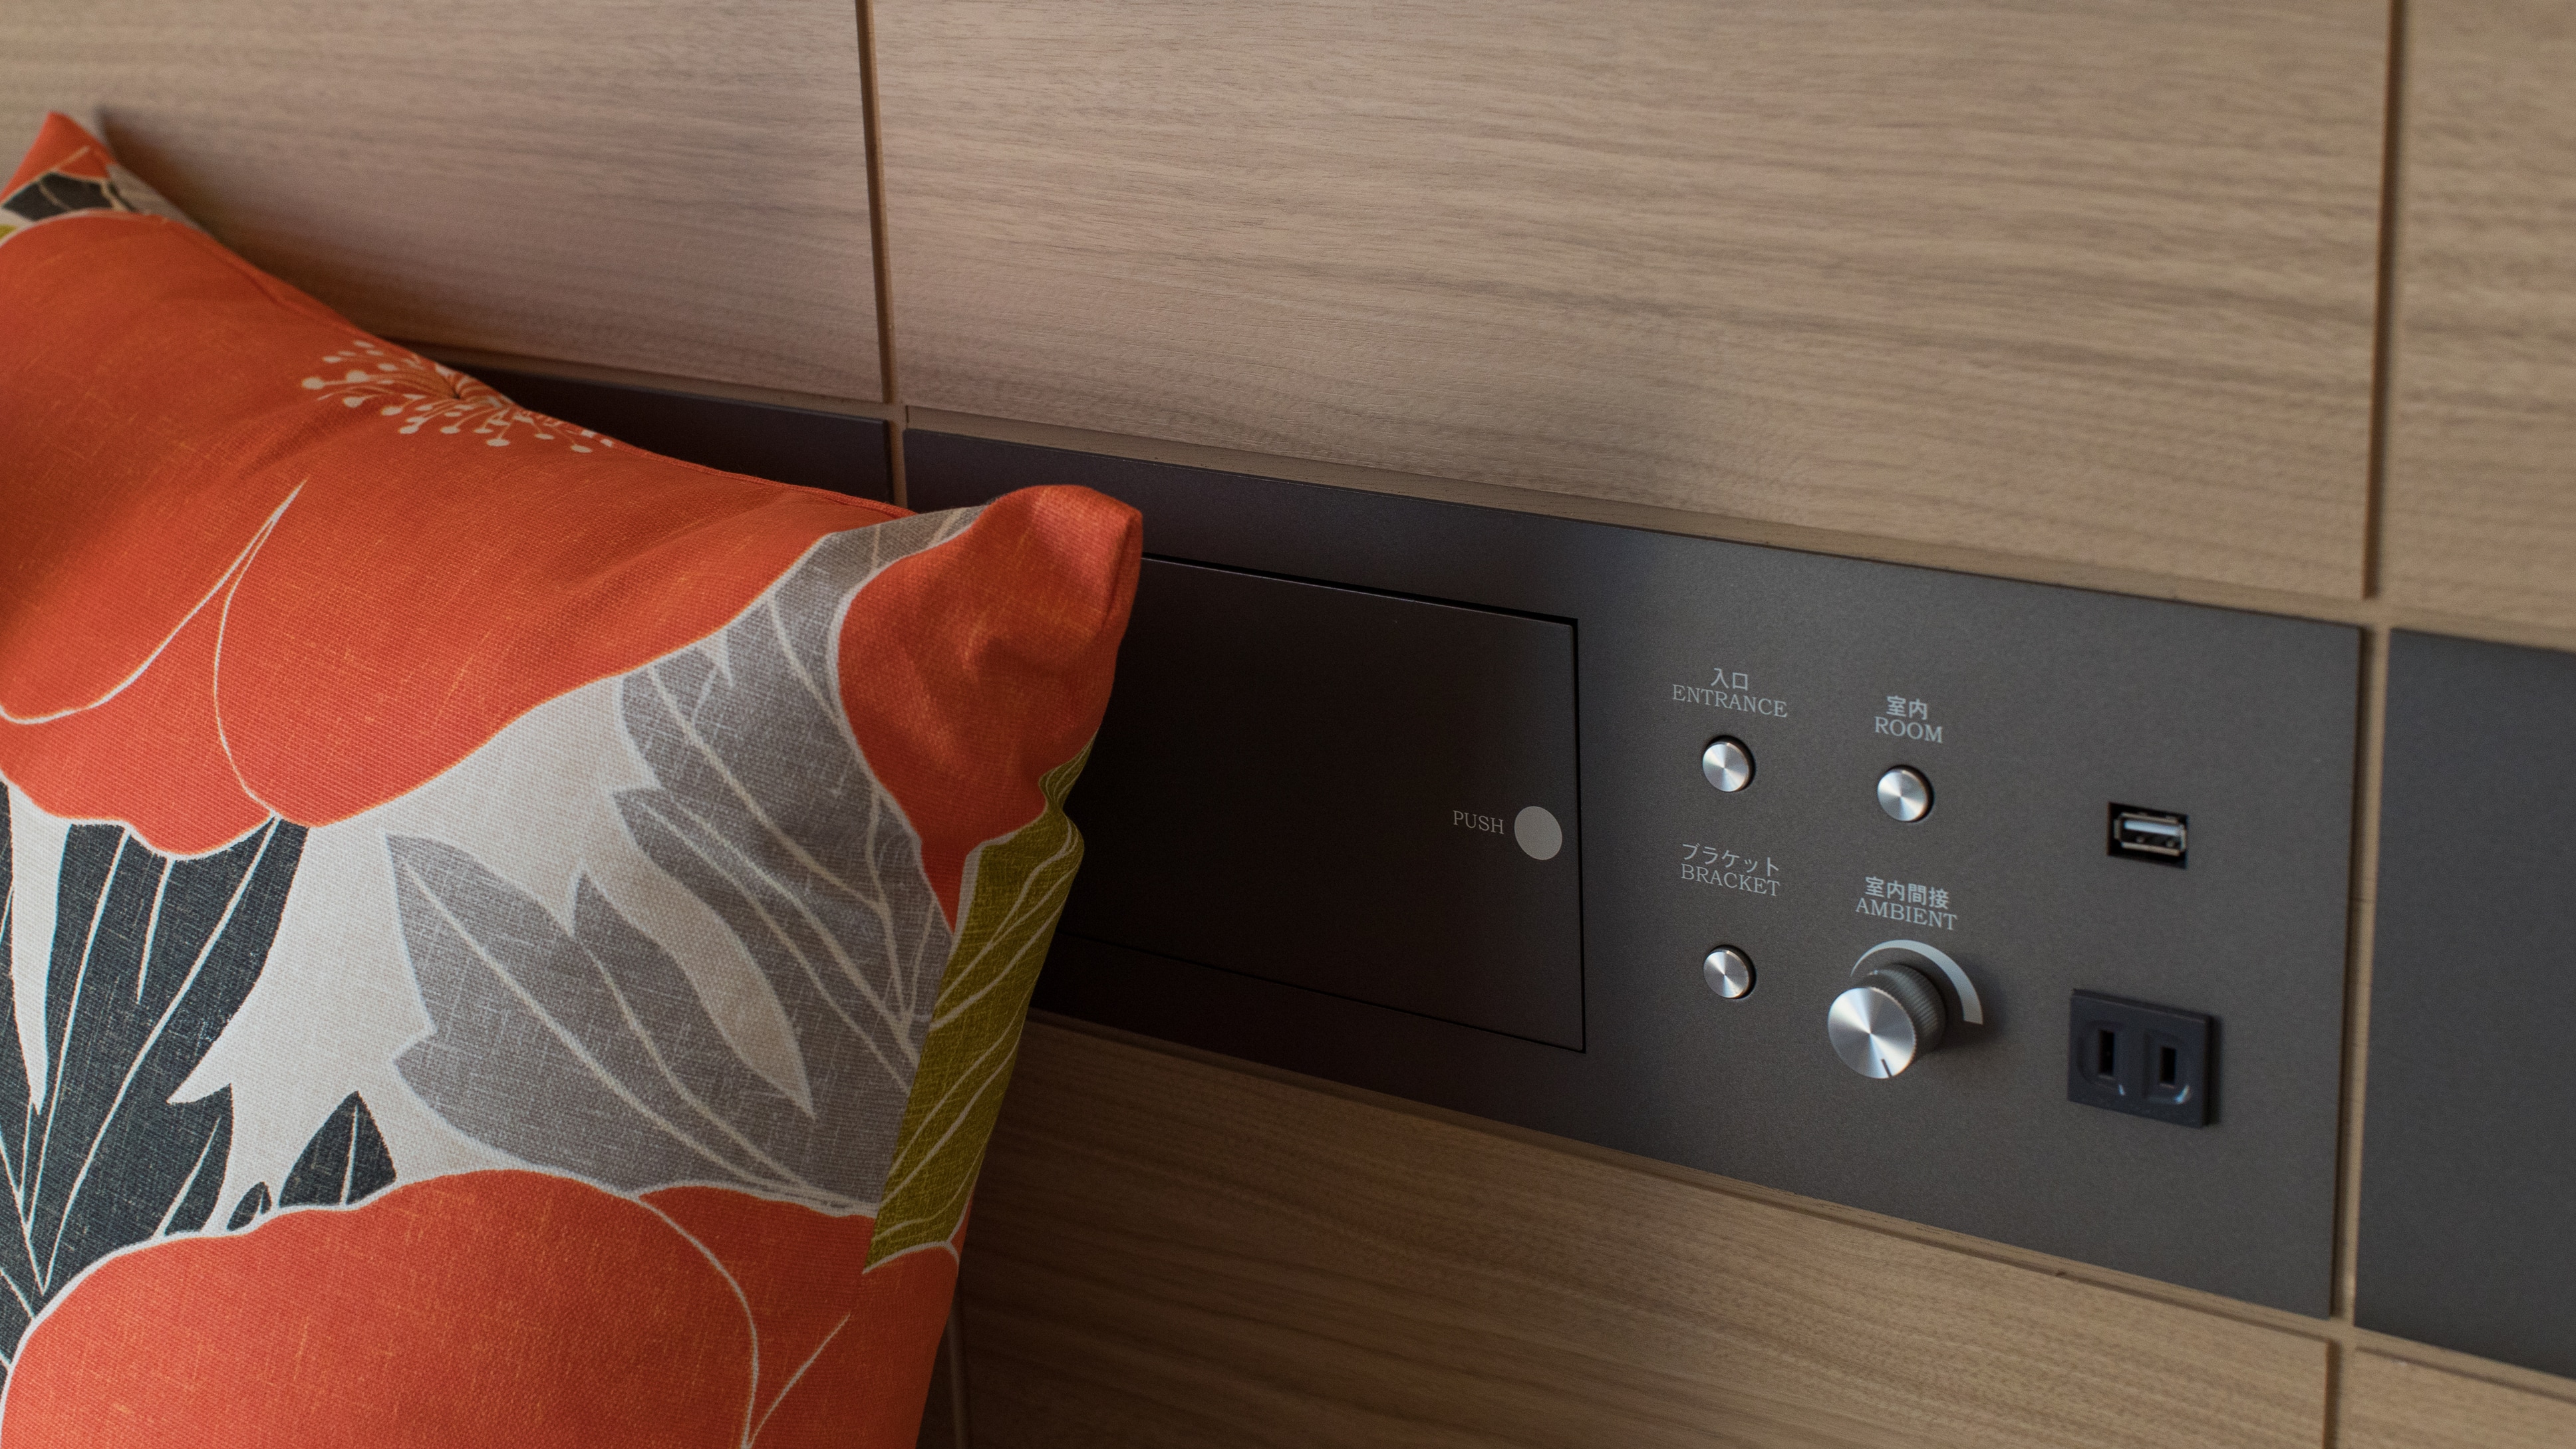 Guest room lighting switch ｜ Equipped with an outlet and a USB port at the bedside